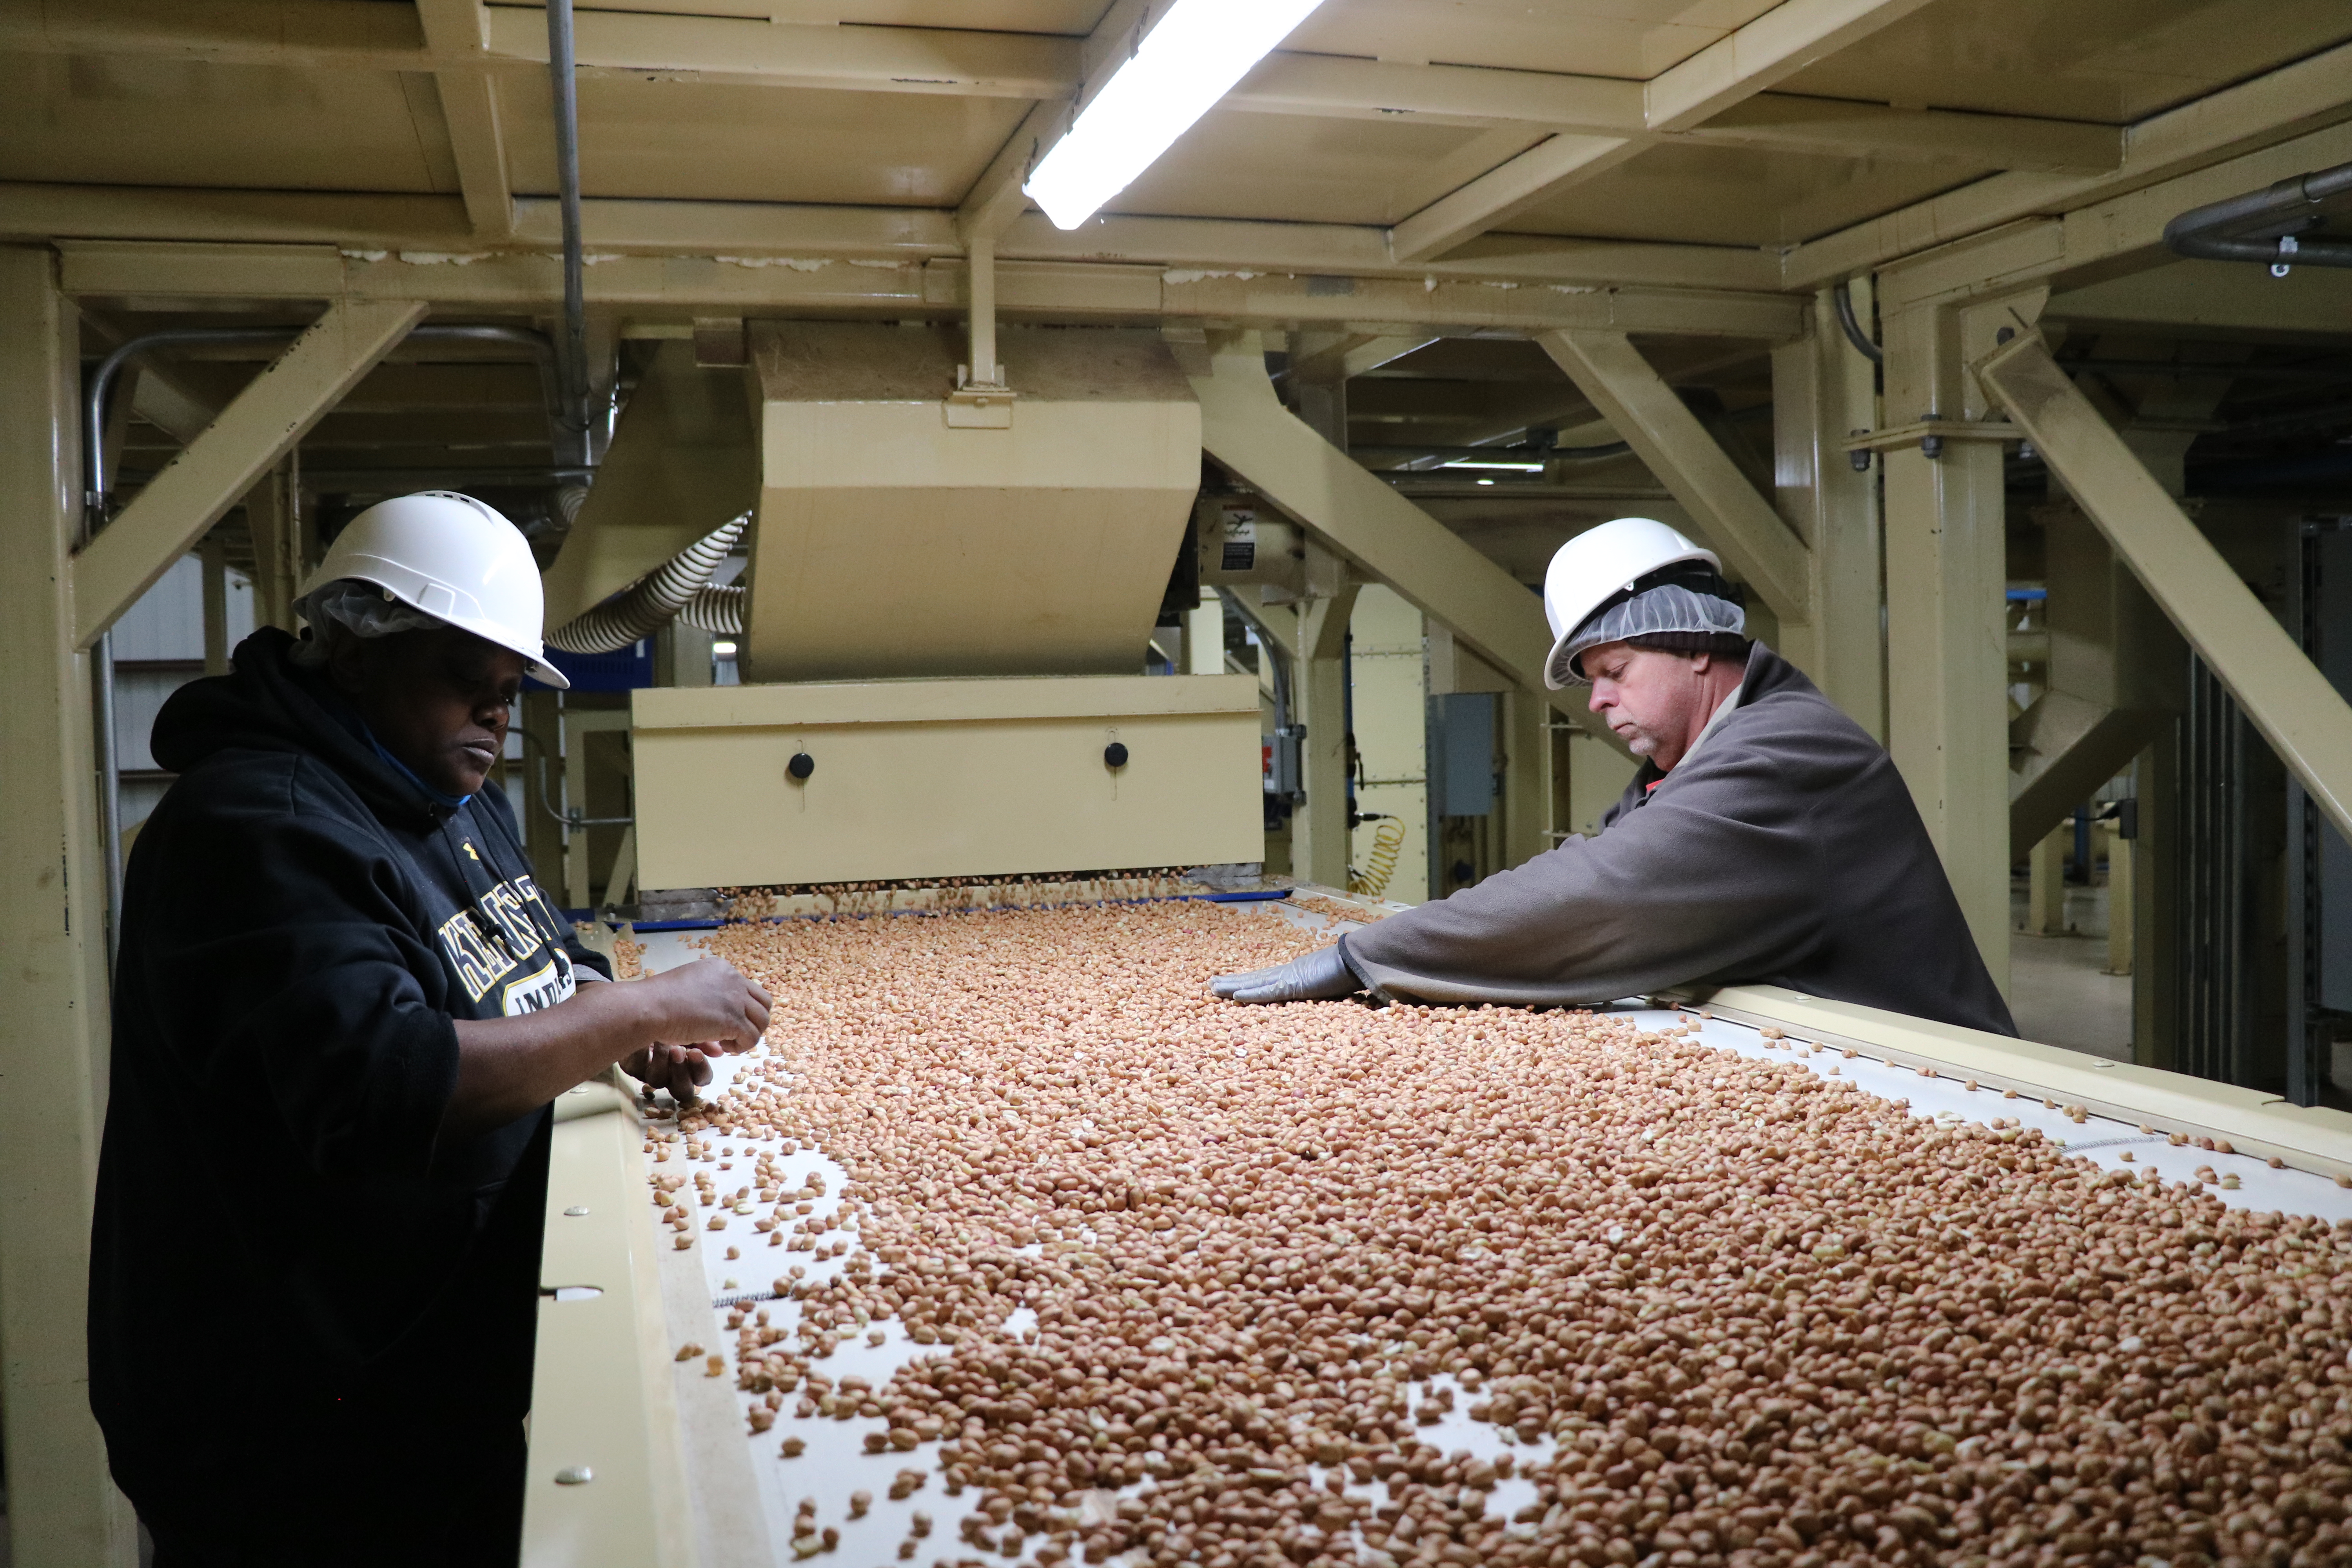 Workers look for damaged peanuts before they move into the bagging facility.